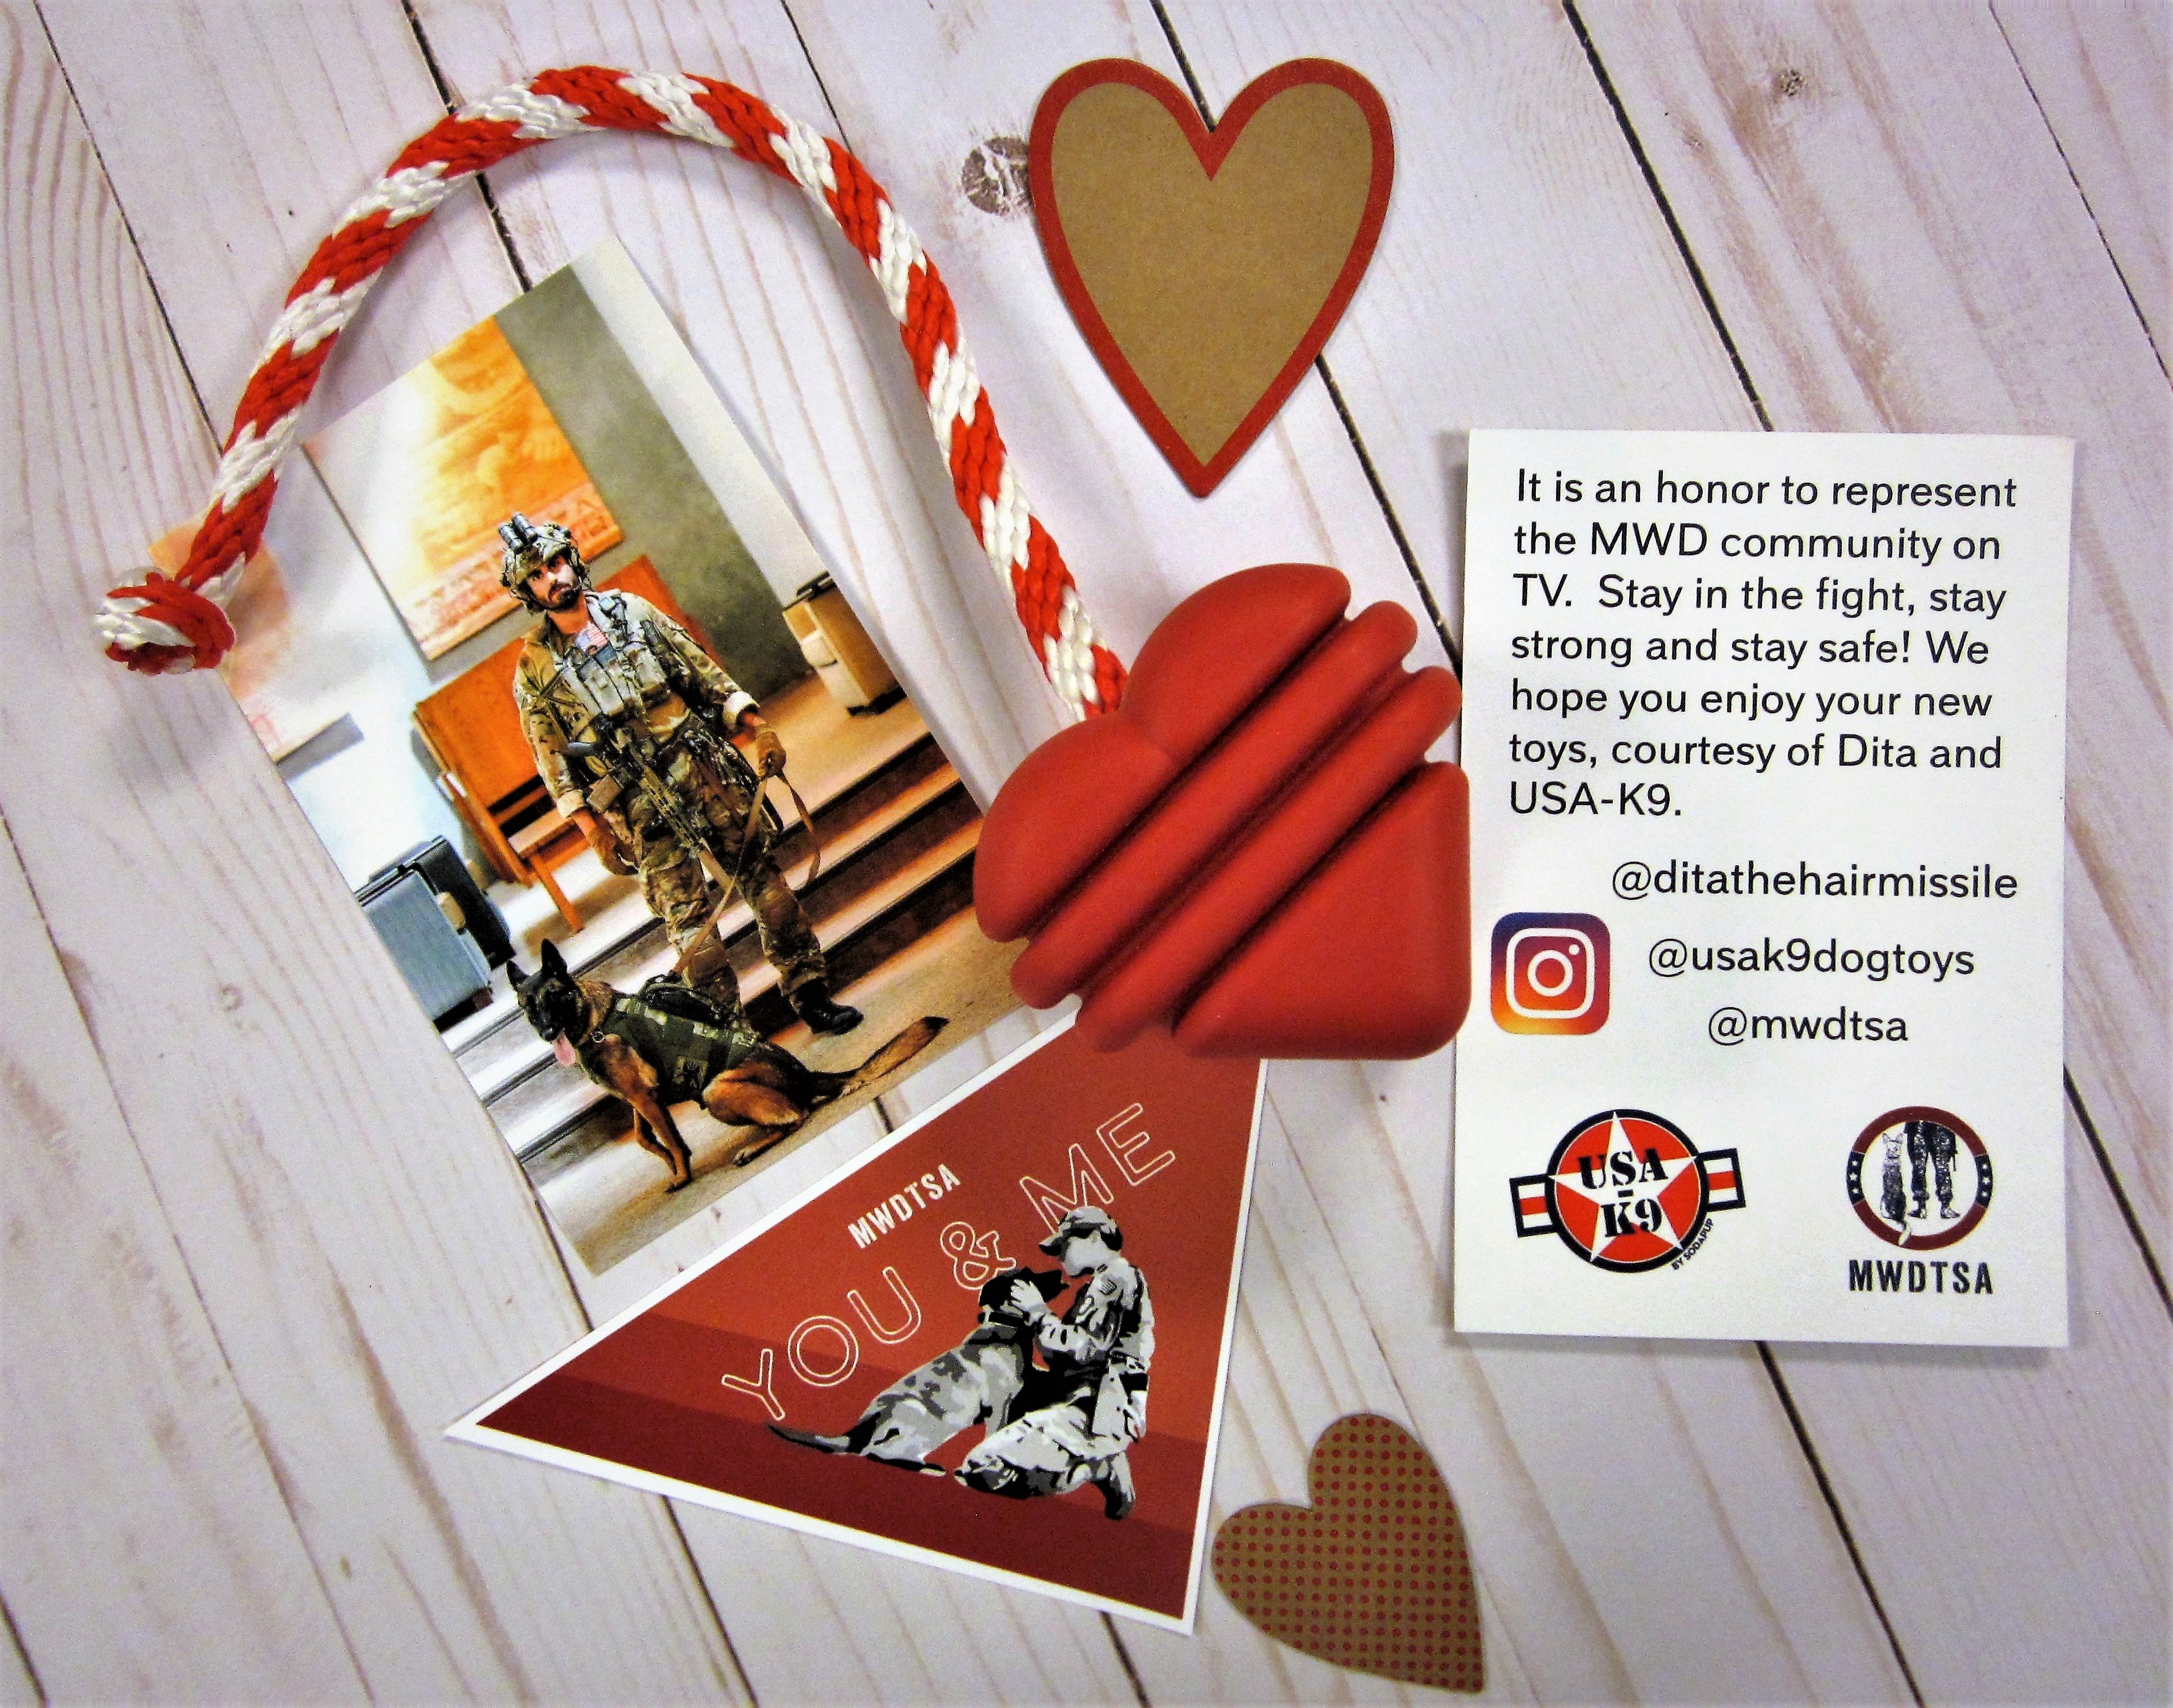 This photo shows the Soda Pup "Heart on a String" rope toy, along with the front and back of a card we enclosed in each care package describing the collaboration with Dita the Hairmissile Dog. It takes a village to fill each care package.